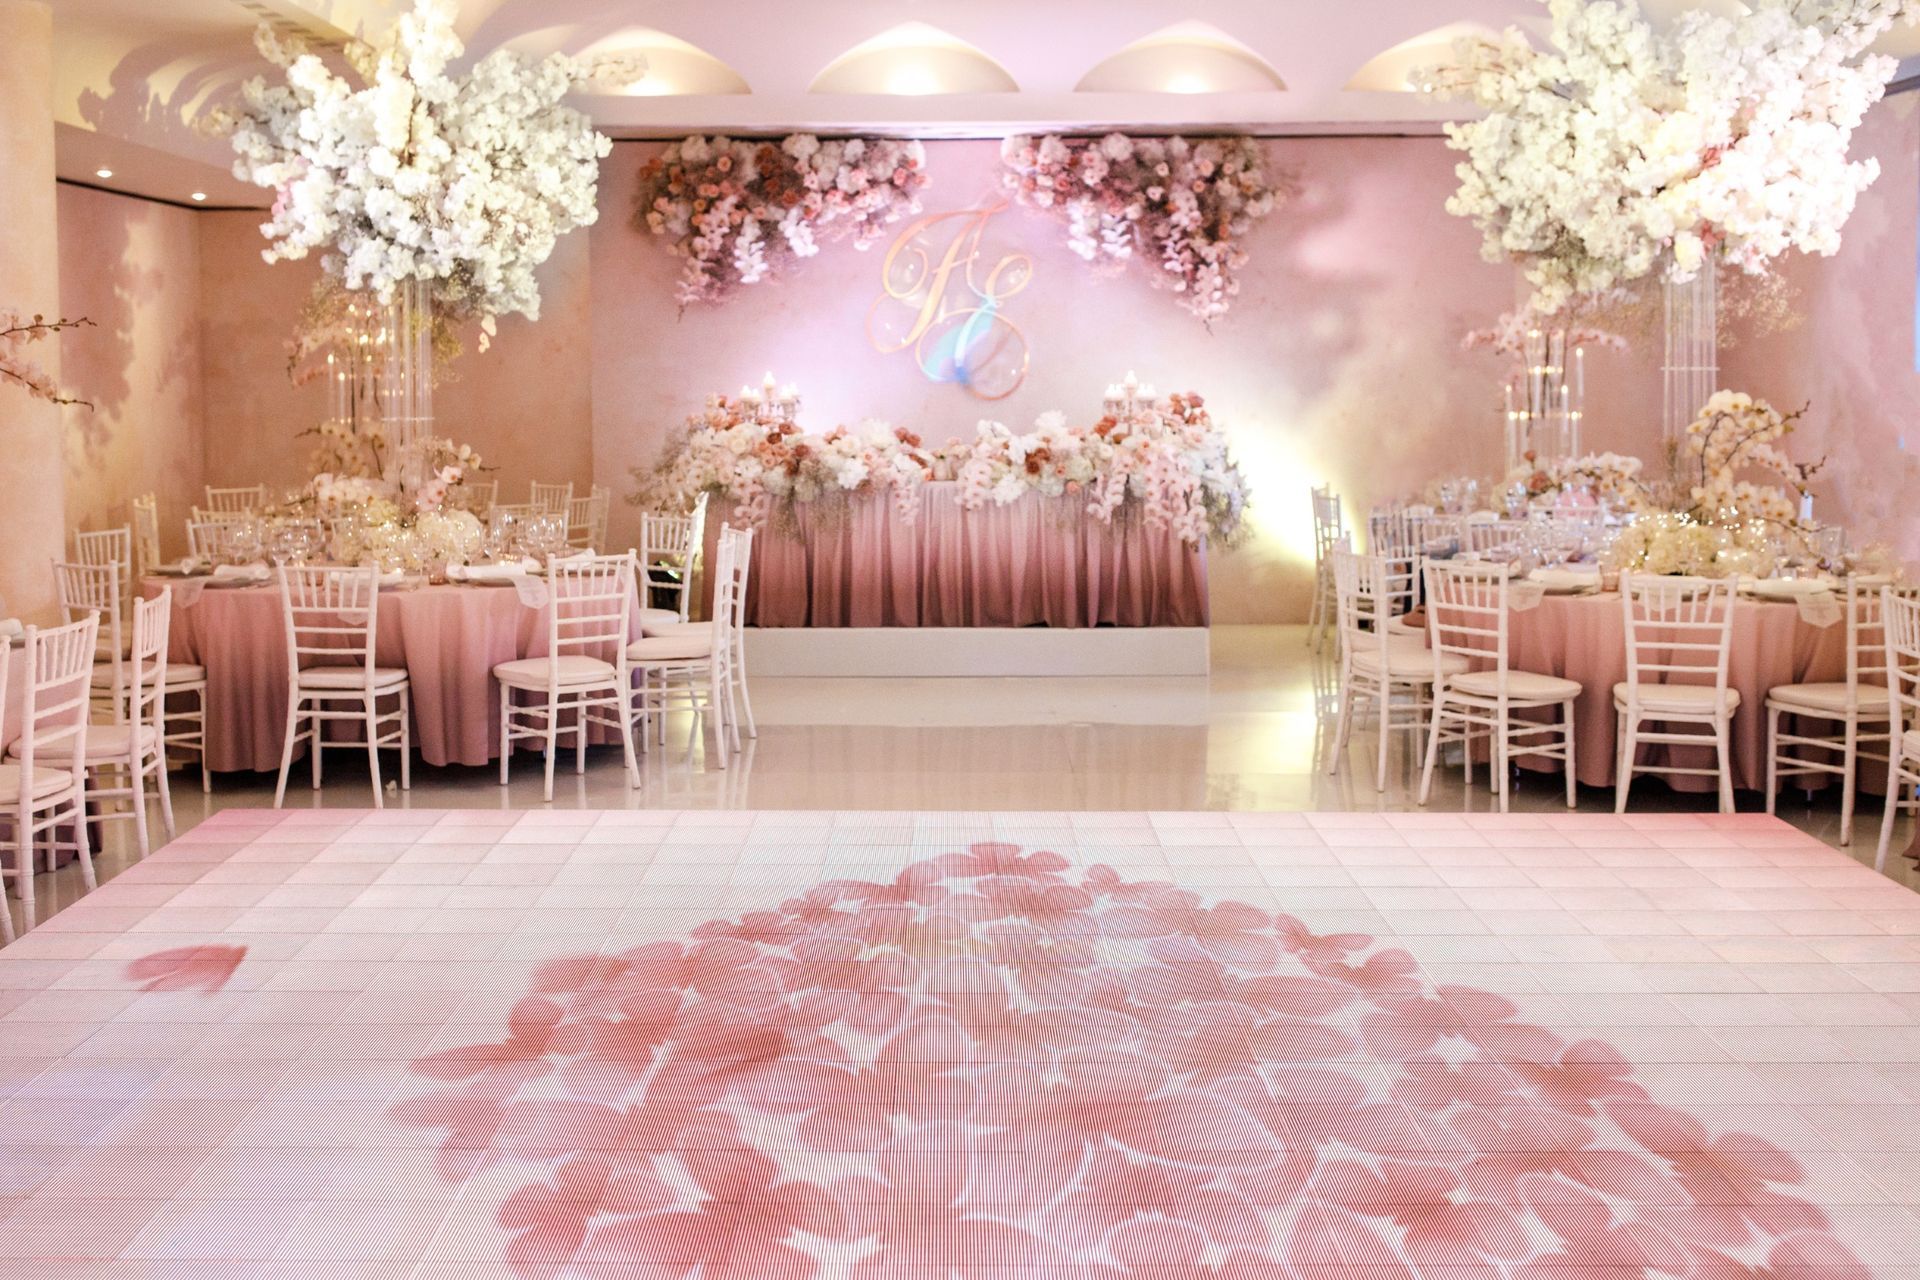 Make Your Next Event One of a Kind With a Floor Wrap